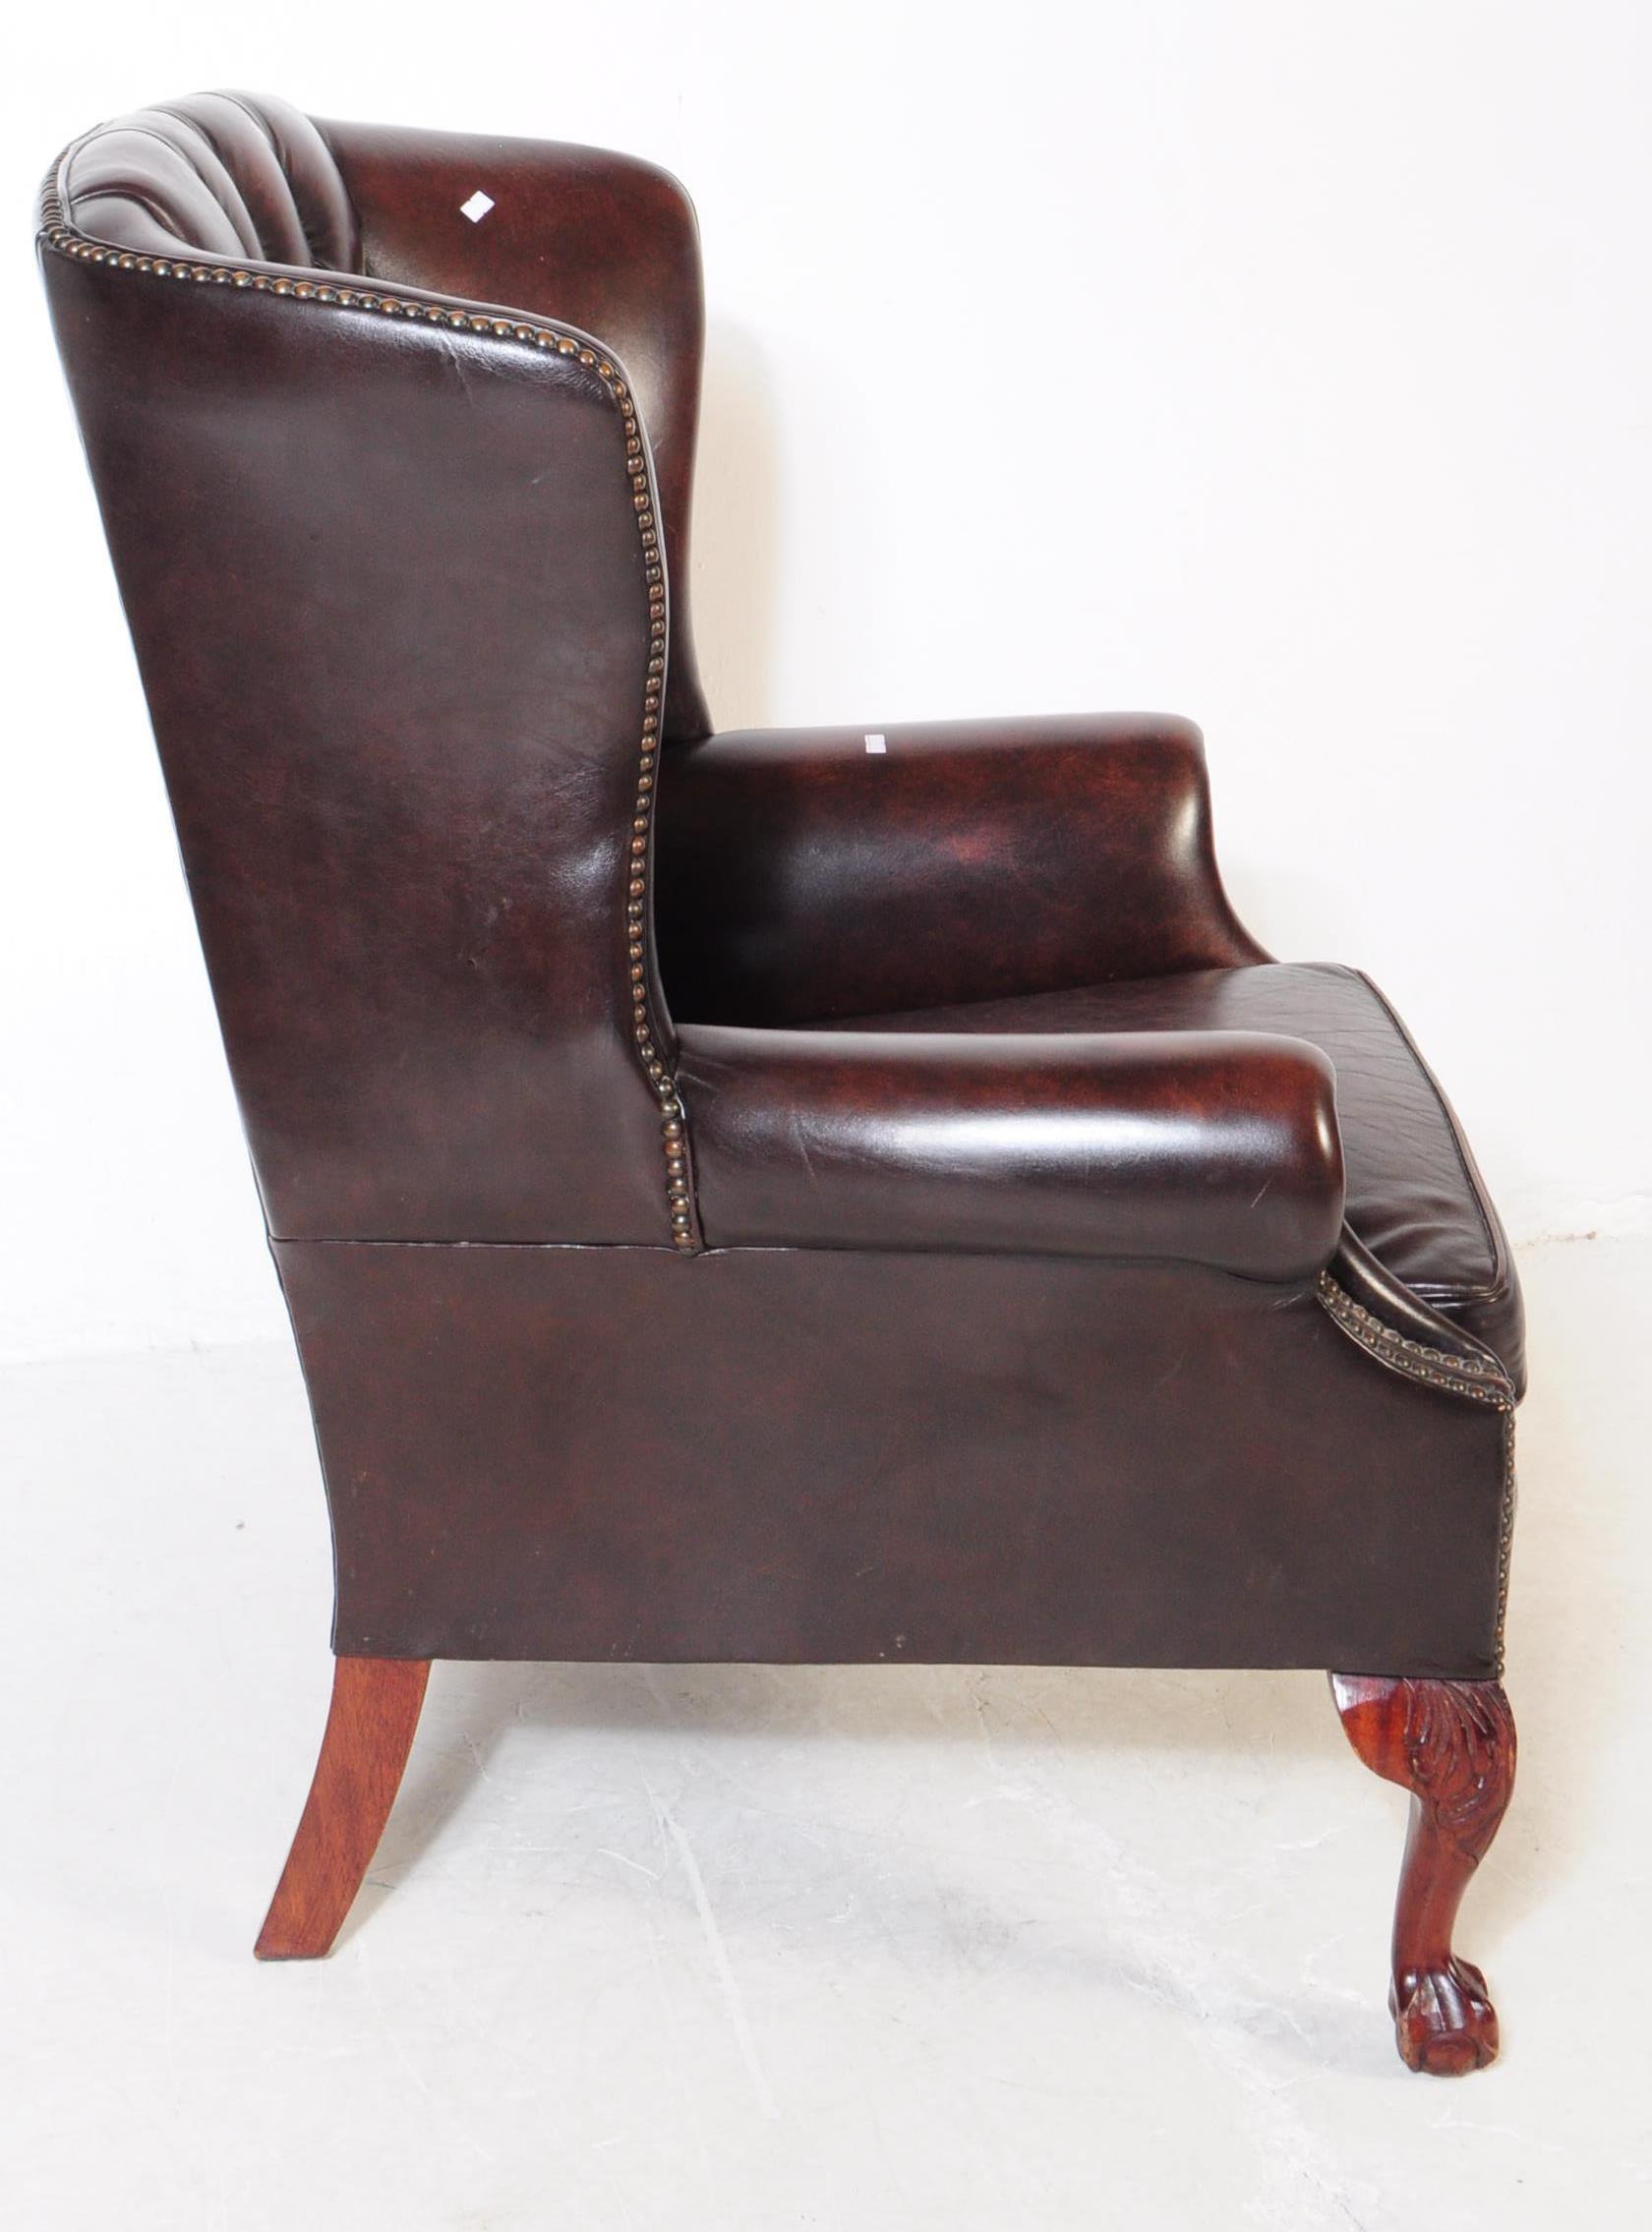 CHESTERFIELD STYLE BROWN LEATHER WINGBACK ARMCHAIR - Image 3 of 4